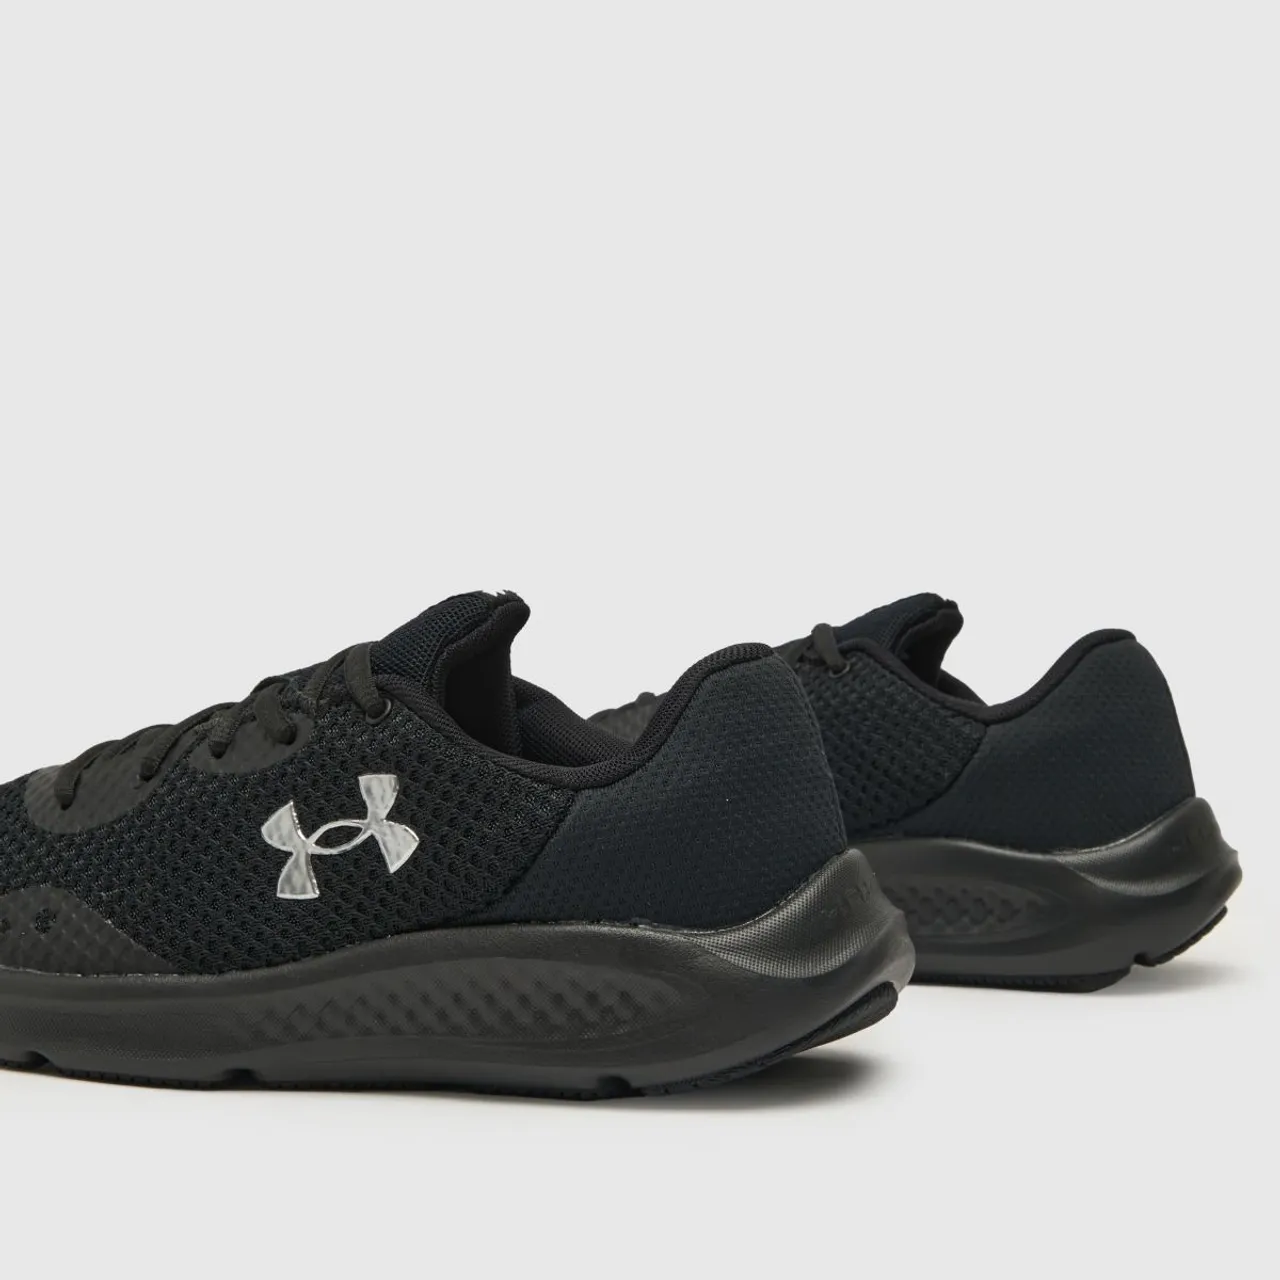 Under Armour Charged Pursuit 3 Trainers In Black & Silver